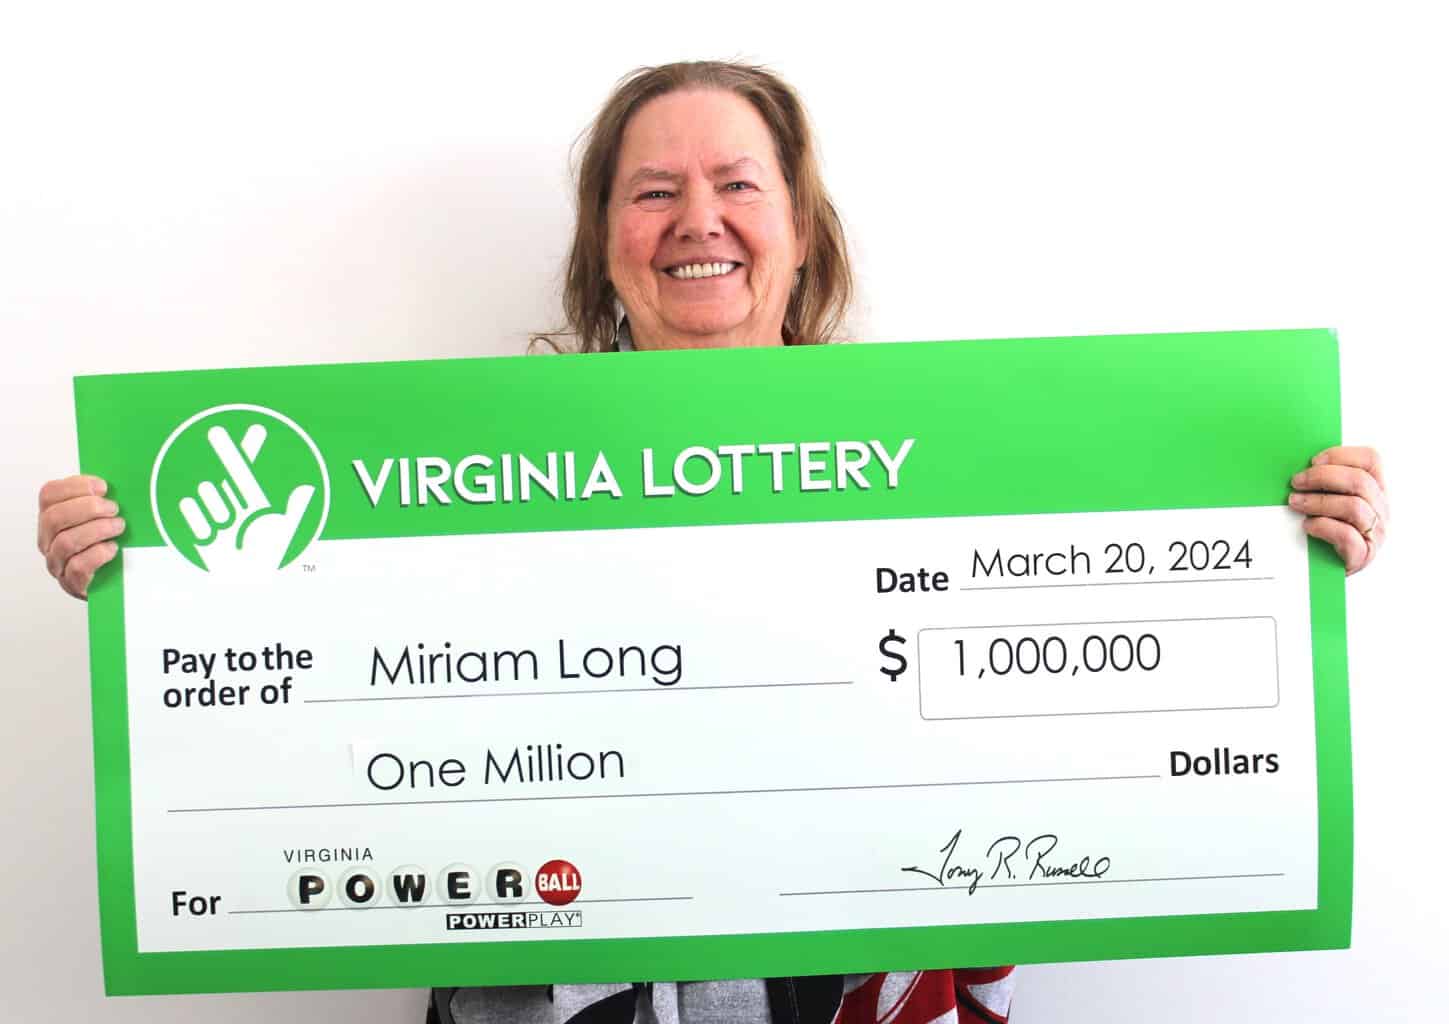 Christiansburg woman wins $1 million by mistake